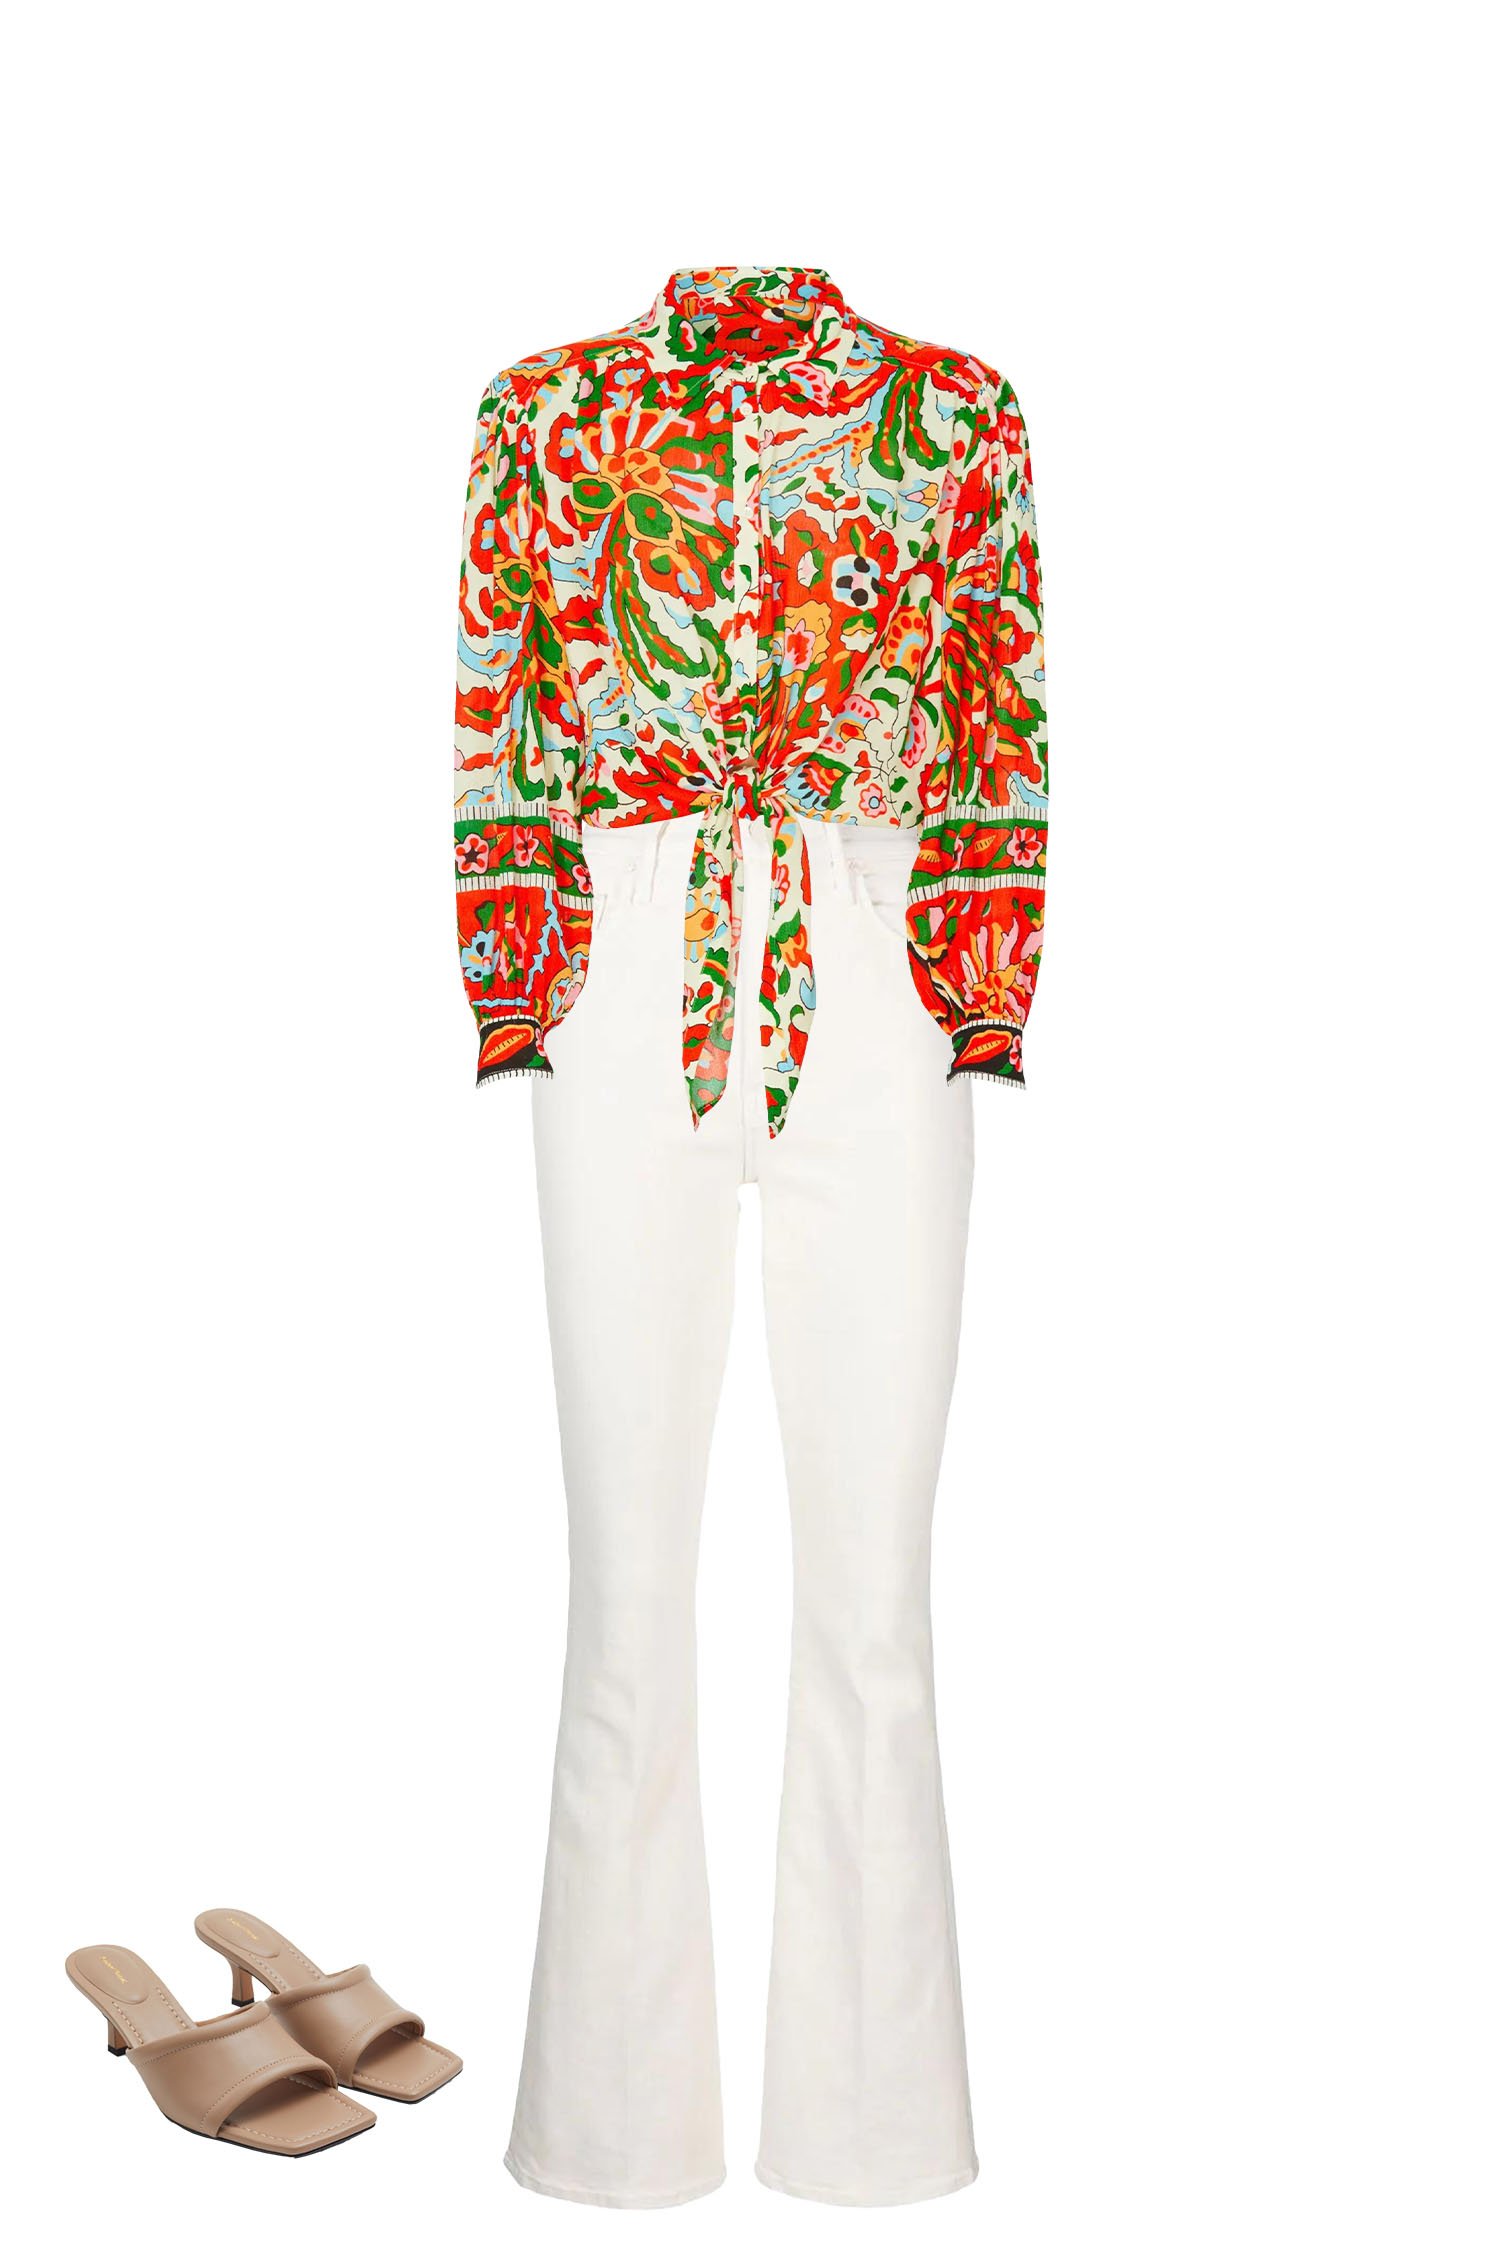 White High Waisted Flare Jeans Outfit with Red Multi-print Tie-Front Shirt and Beige Kitten Heel Sandals